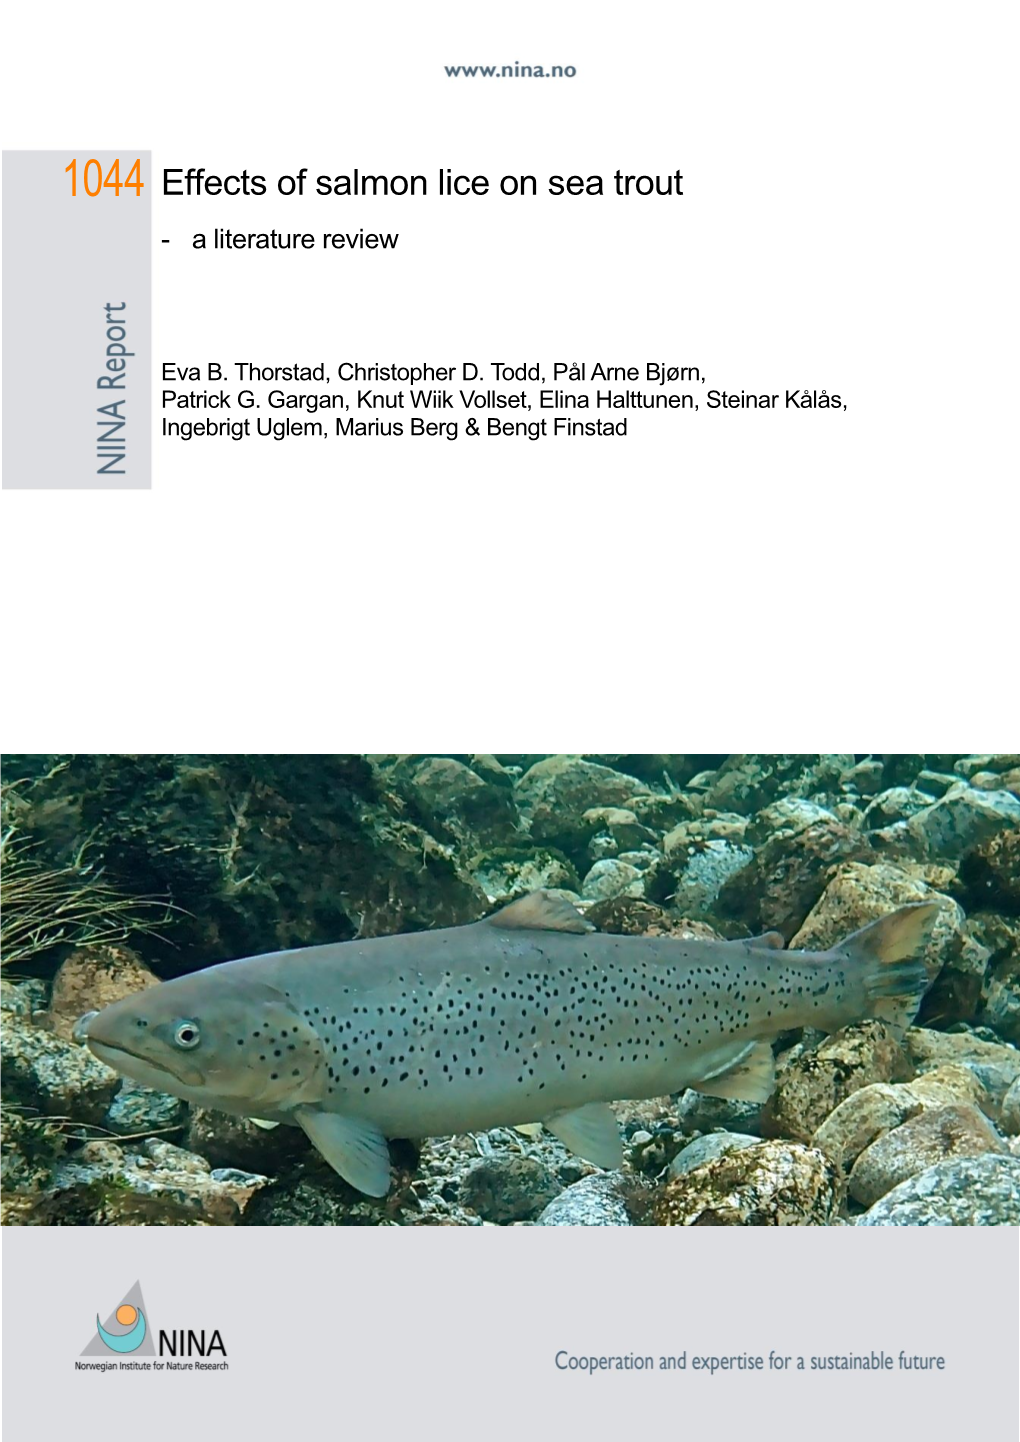 Effects of Salmon Lice on Sea Trout